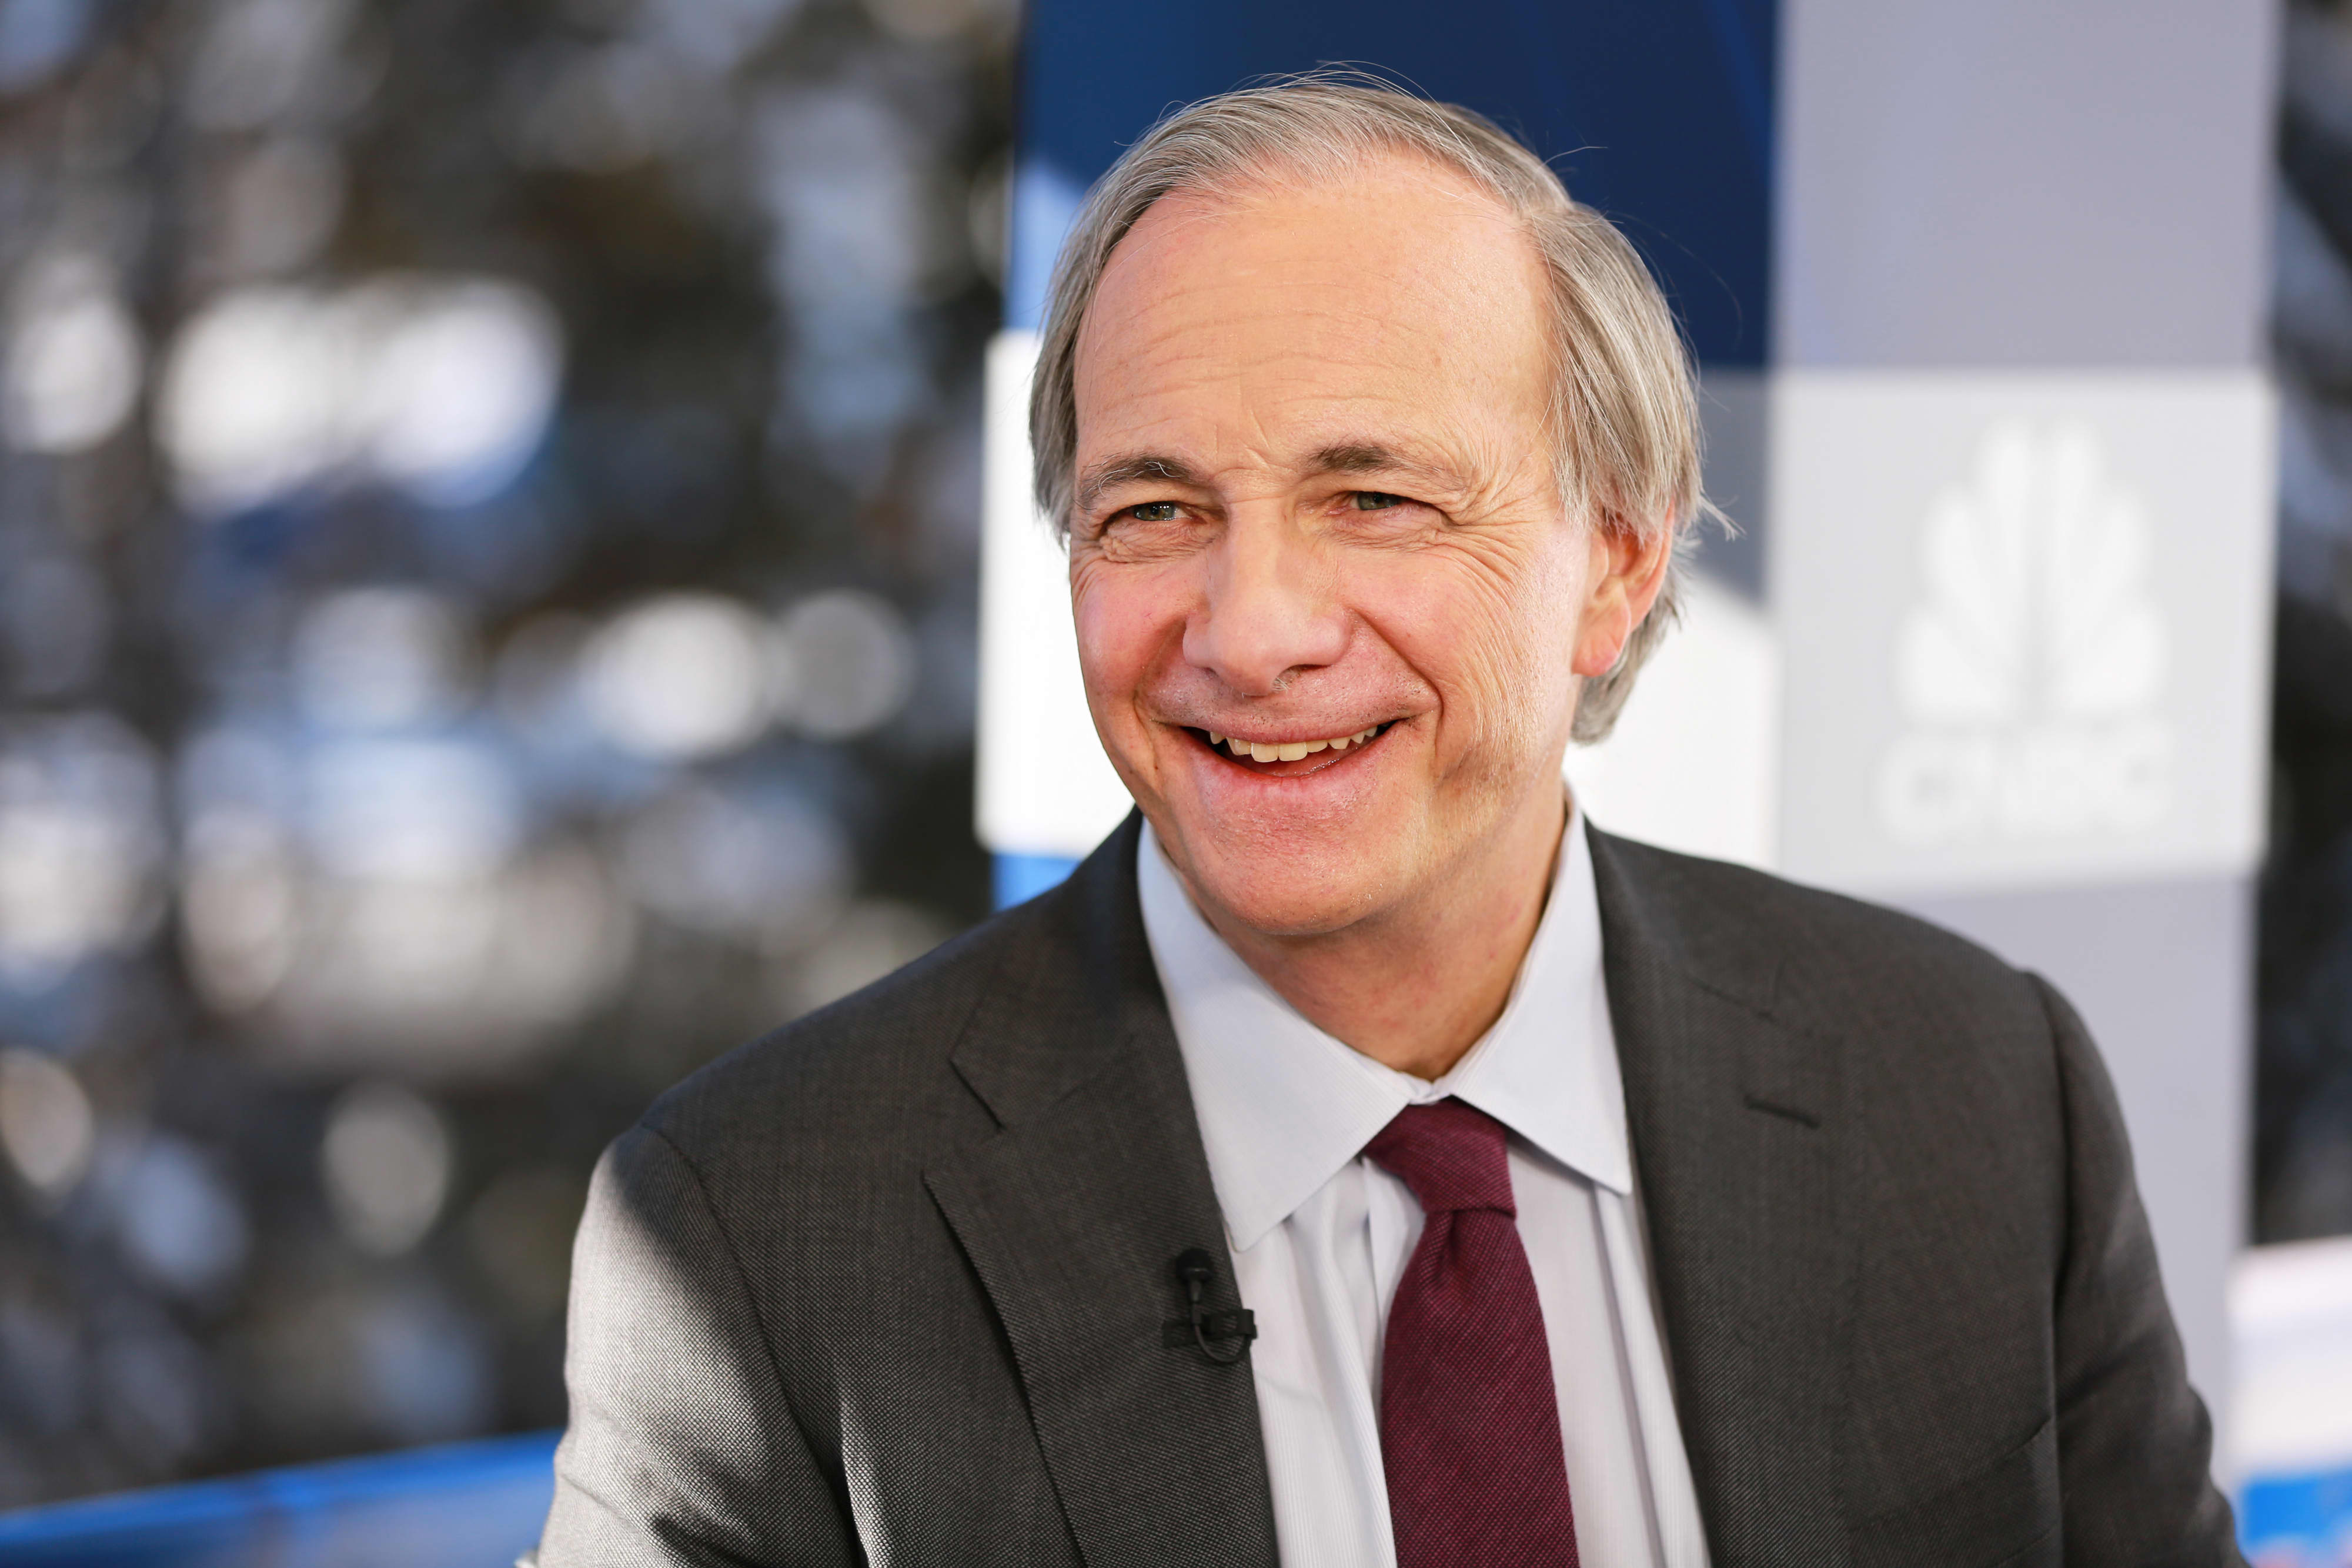 Ray Dalio's advice on what to do during the coronavirus pandemic